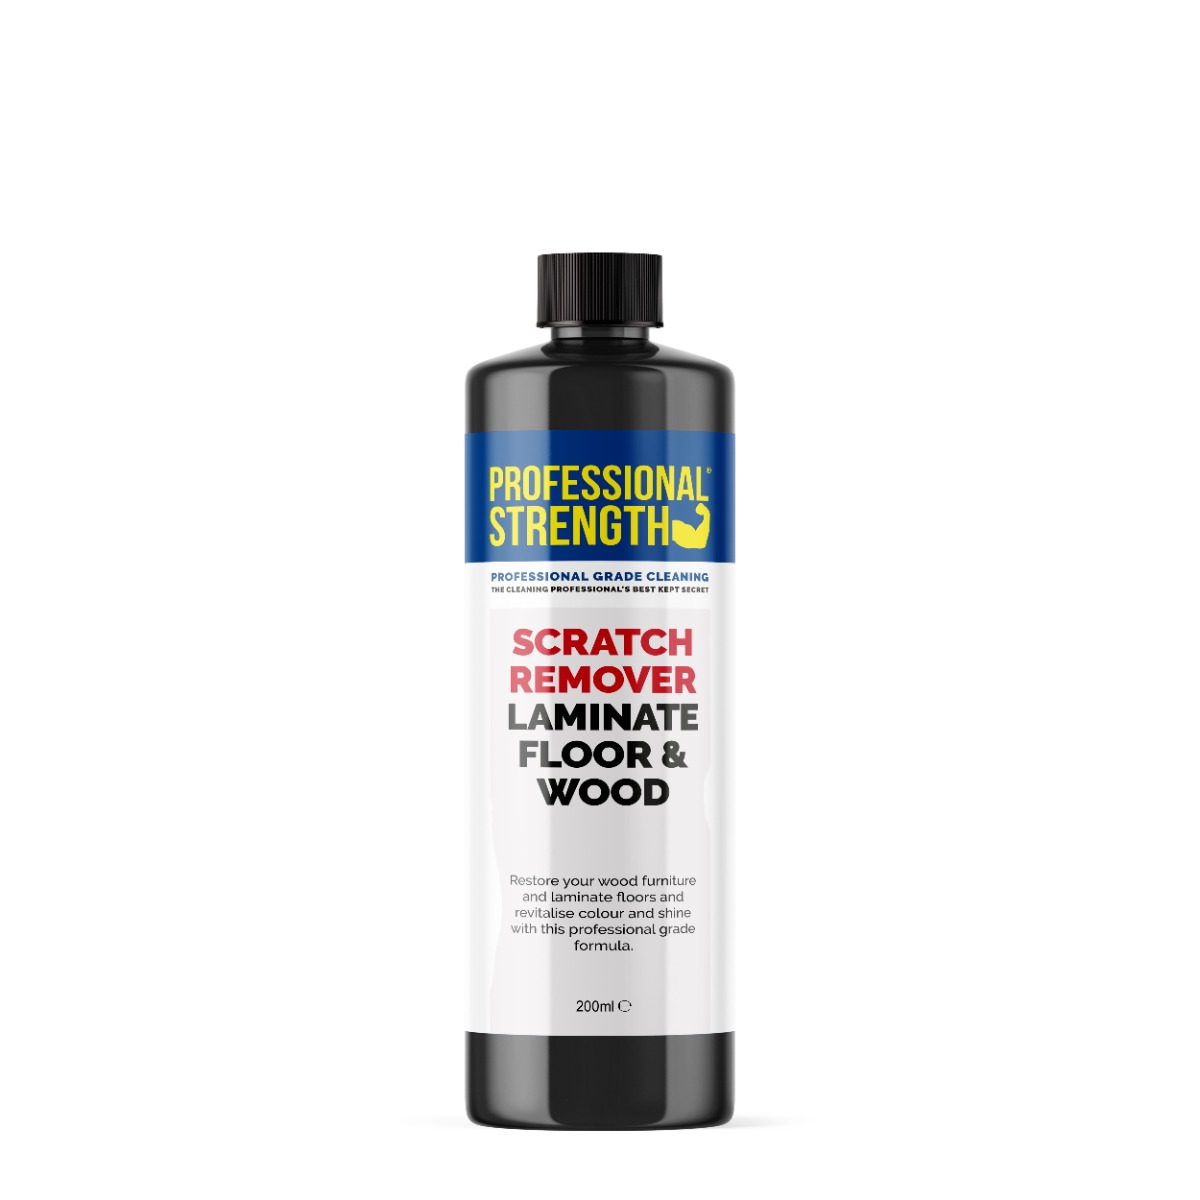 Professional Strength Laminate Floor and Wood Scratch Remover | StressNoMore